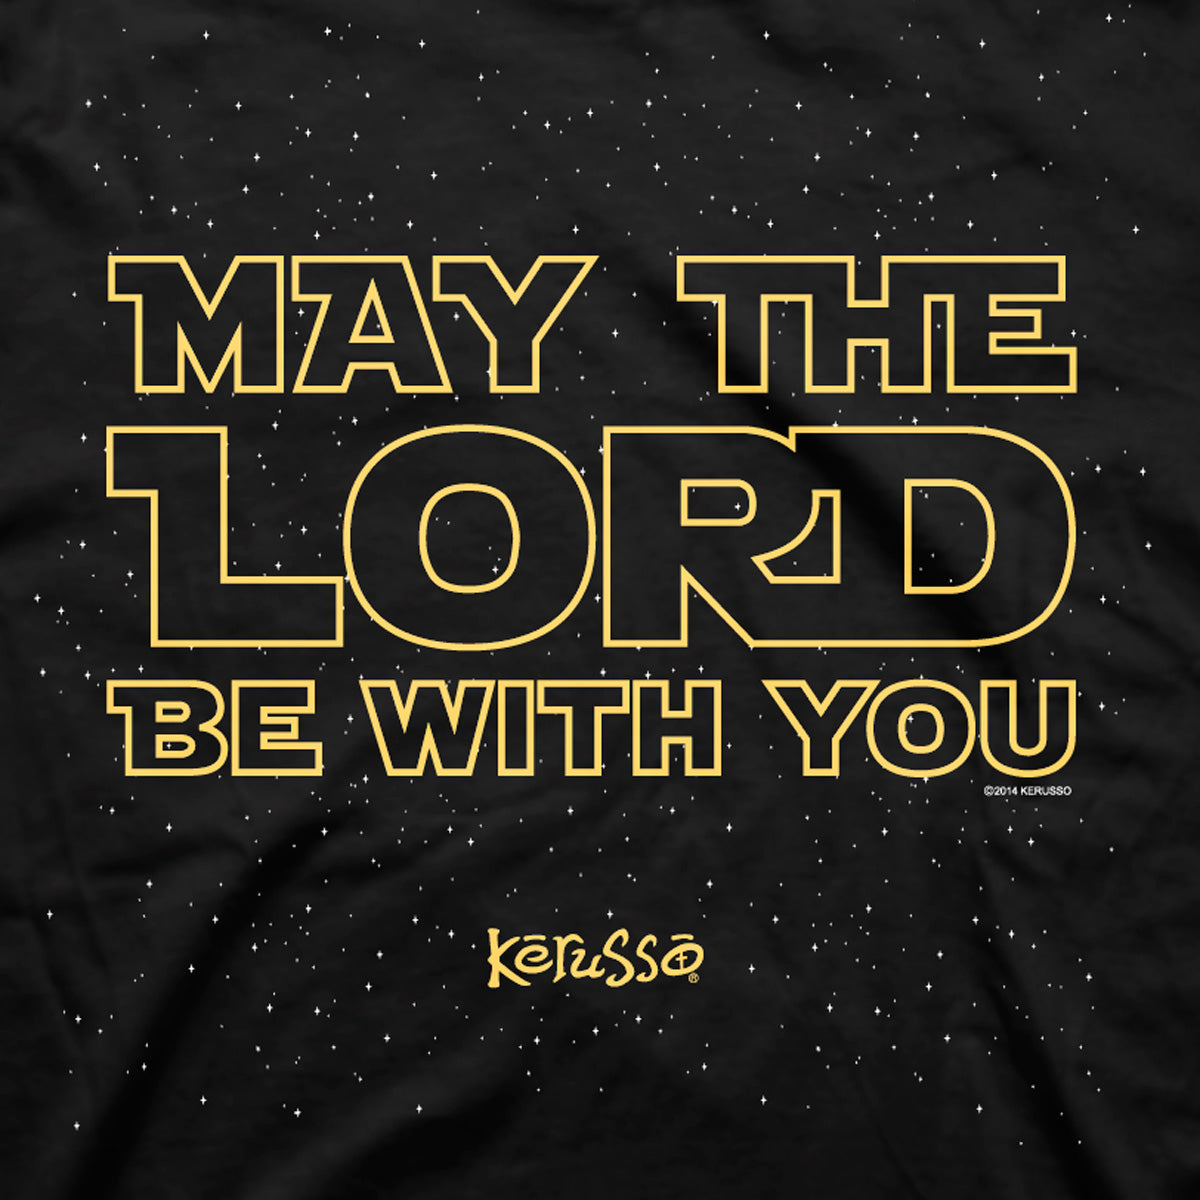 Kerusso Christian T-Shirt May The Lord